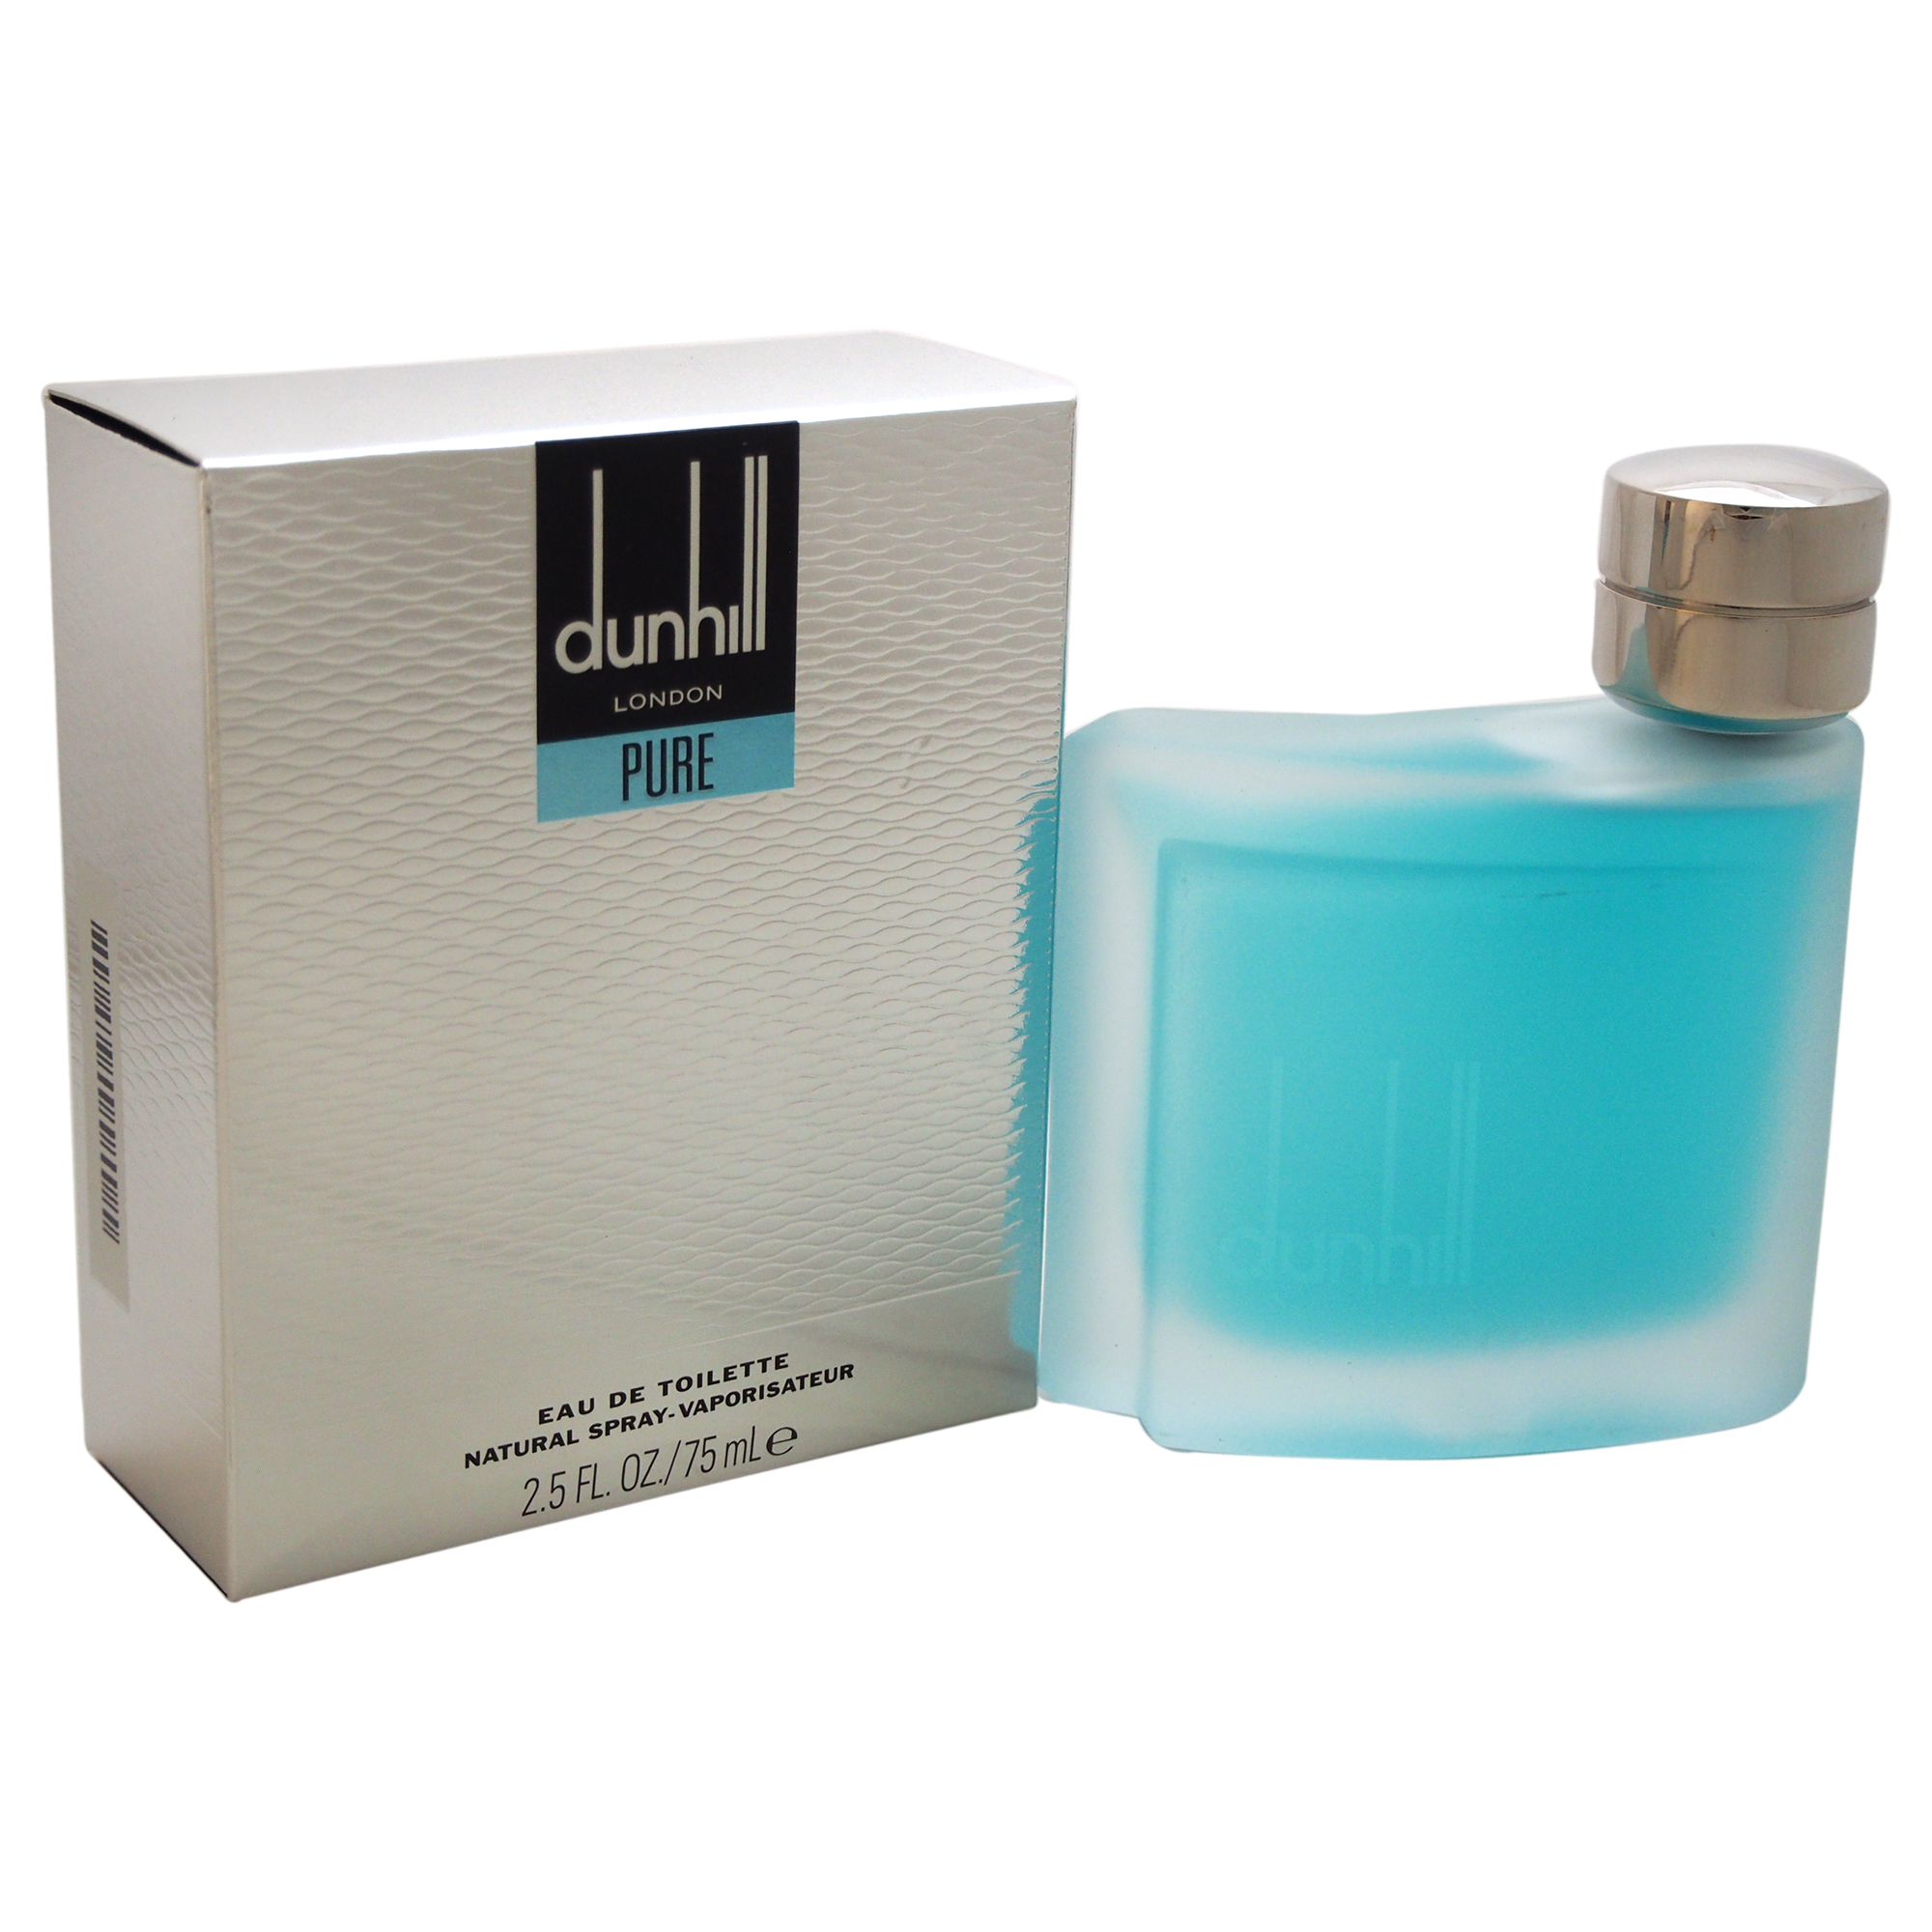 Dunhill London Pure by Alfred Dunhill for Men - 2.5 oz EDT Spray